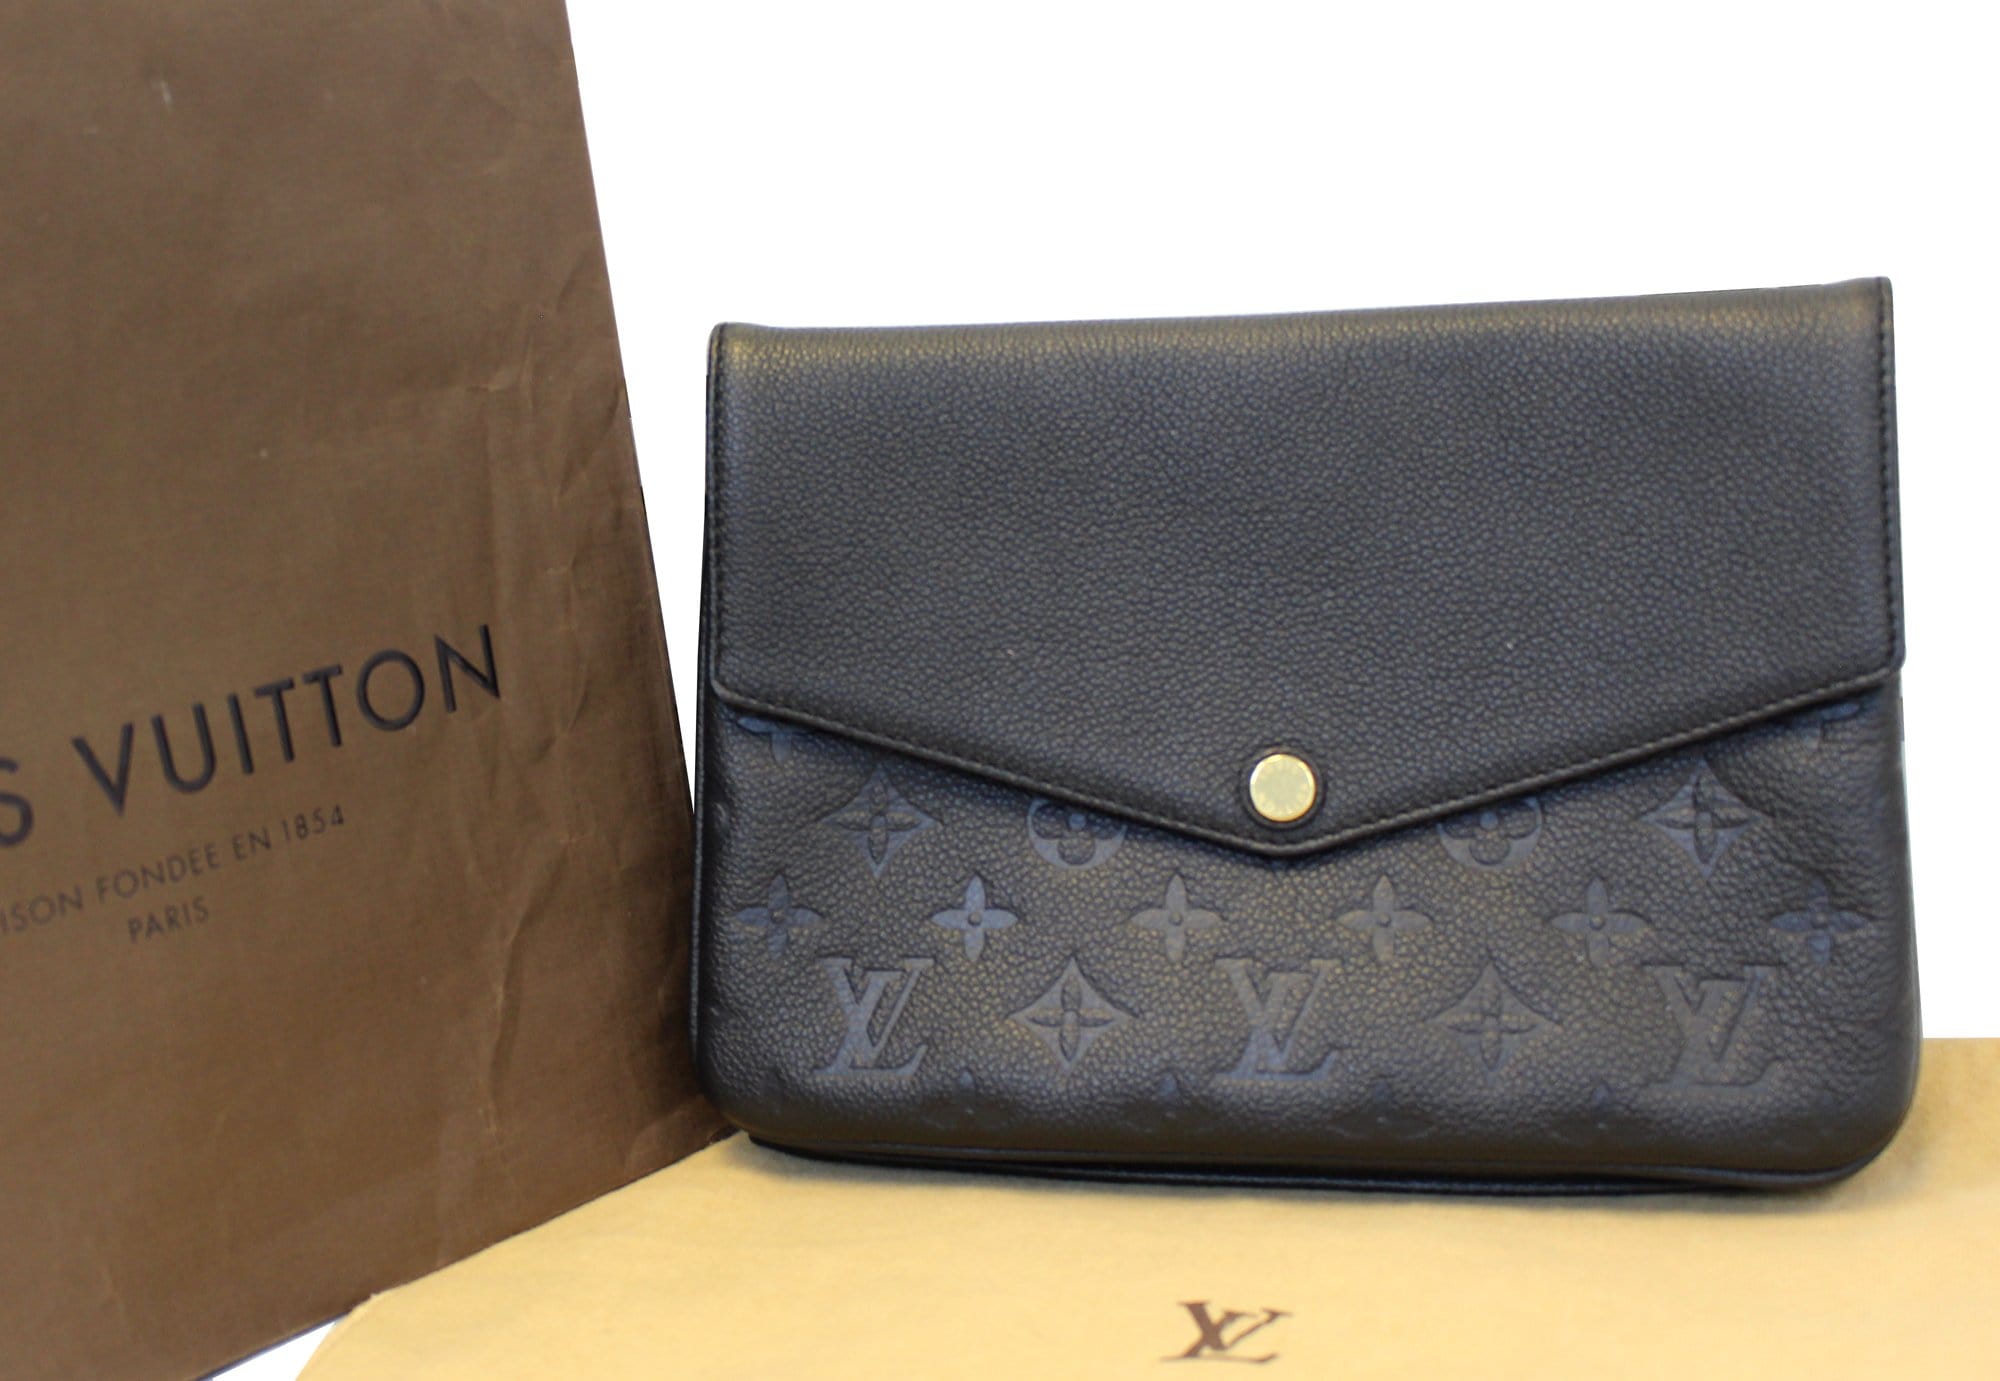 Authentic Louis Vuitton LV Twice Twinset Crossbody Bag in Black